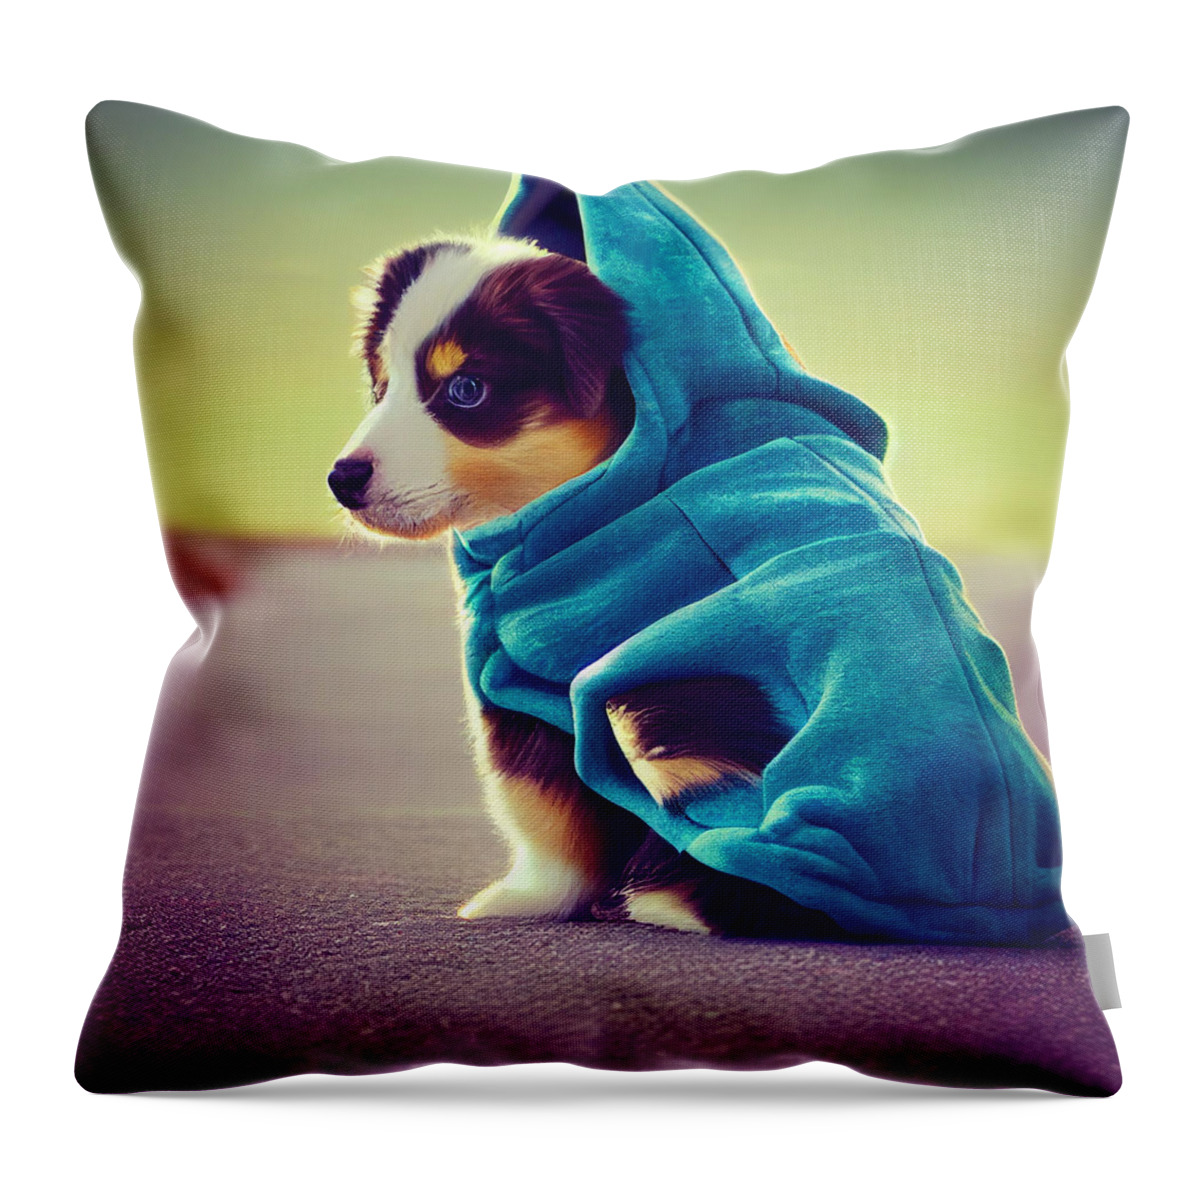 Design Throw Pillow featuring the painting Cute Australian Shepard Puppy In A Shark Hoodie A416441c C1a2 4b6f A676 C816c474f6de by MotionAge Designs